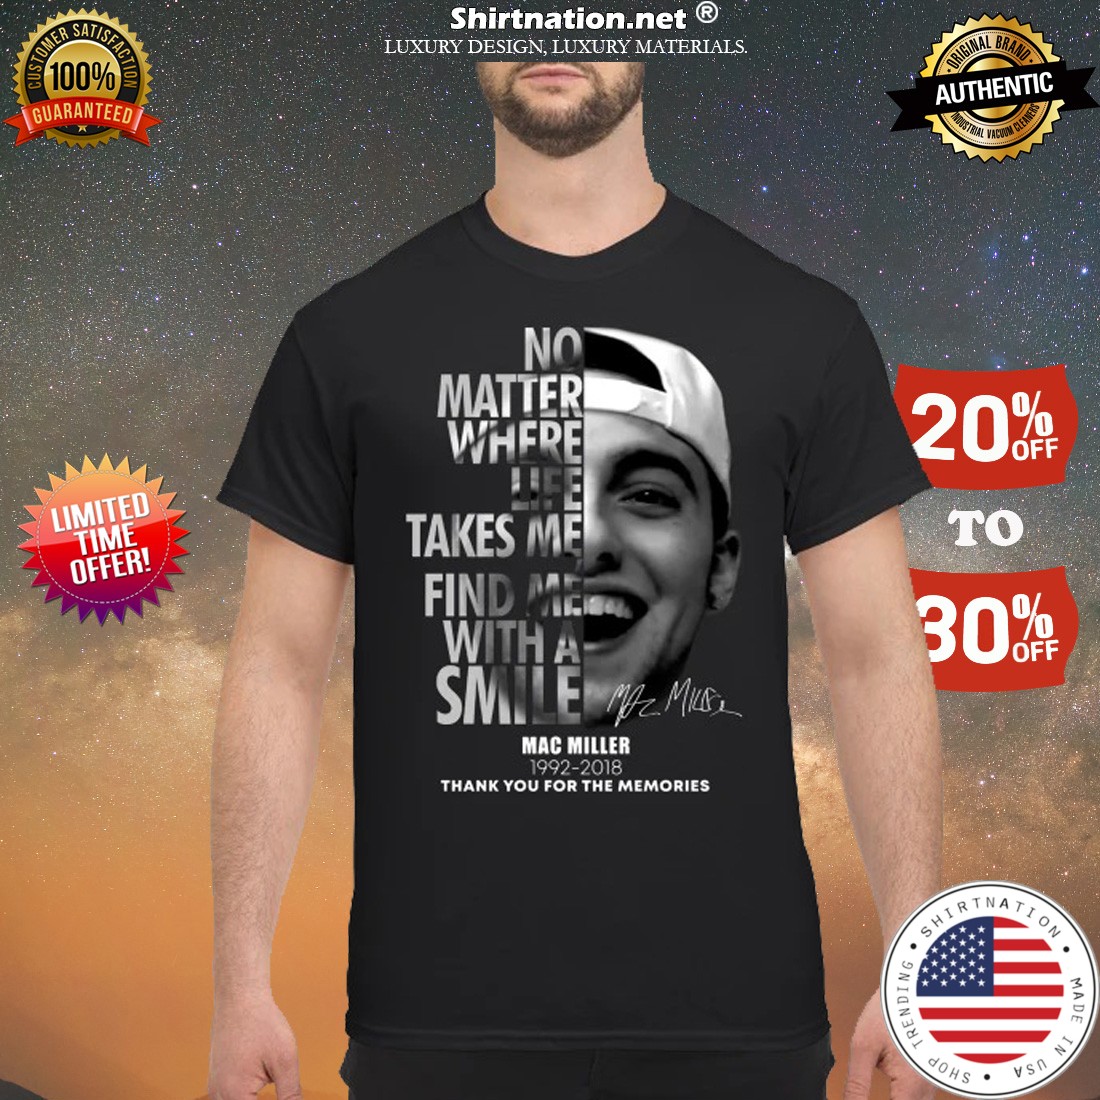 No matter where life takes me find me with a smile Mac Miller 1992 2018 shirt